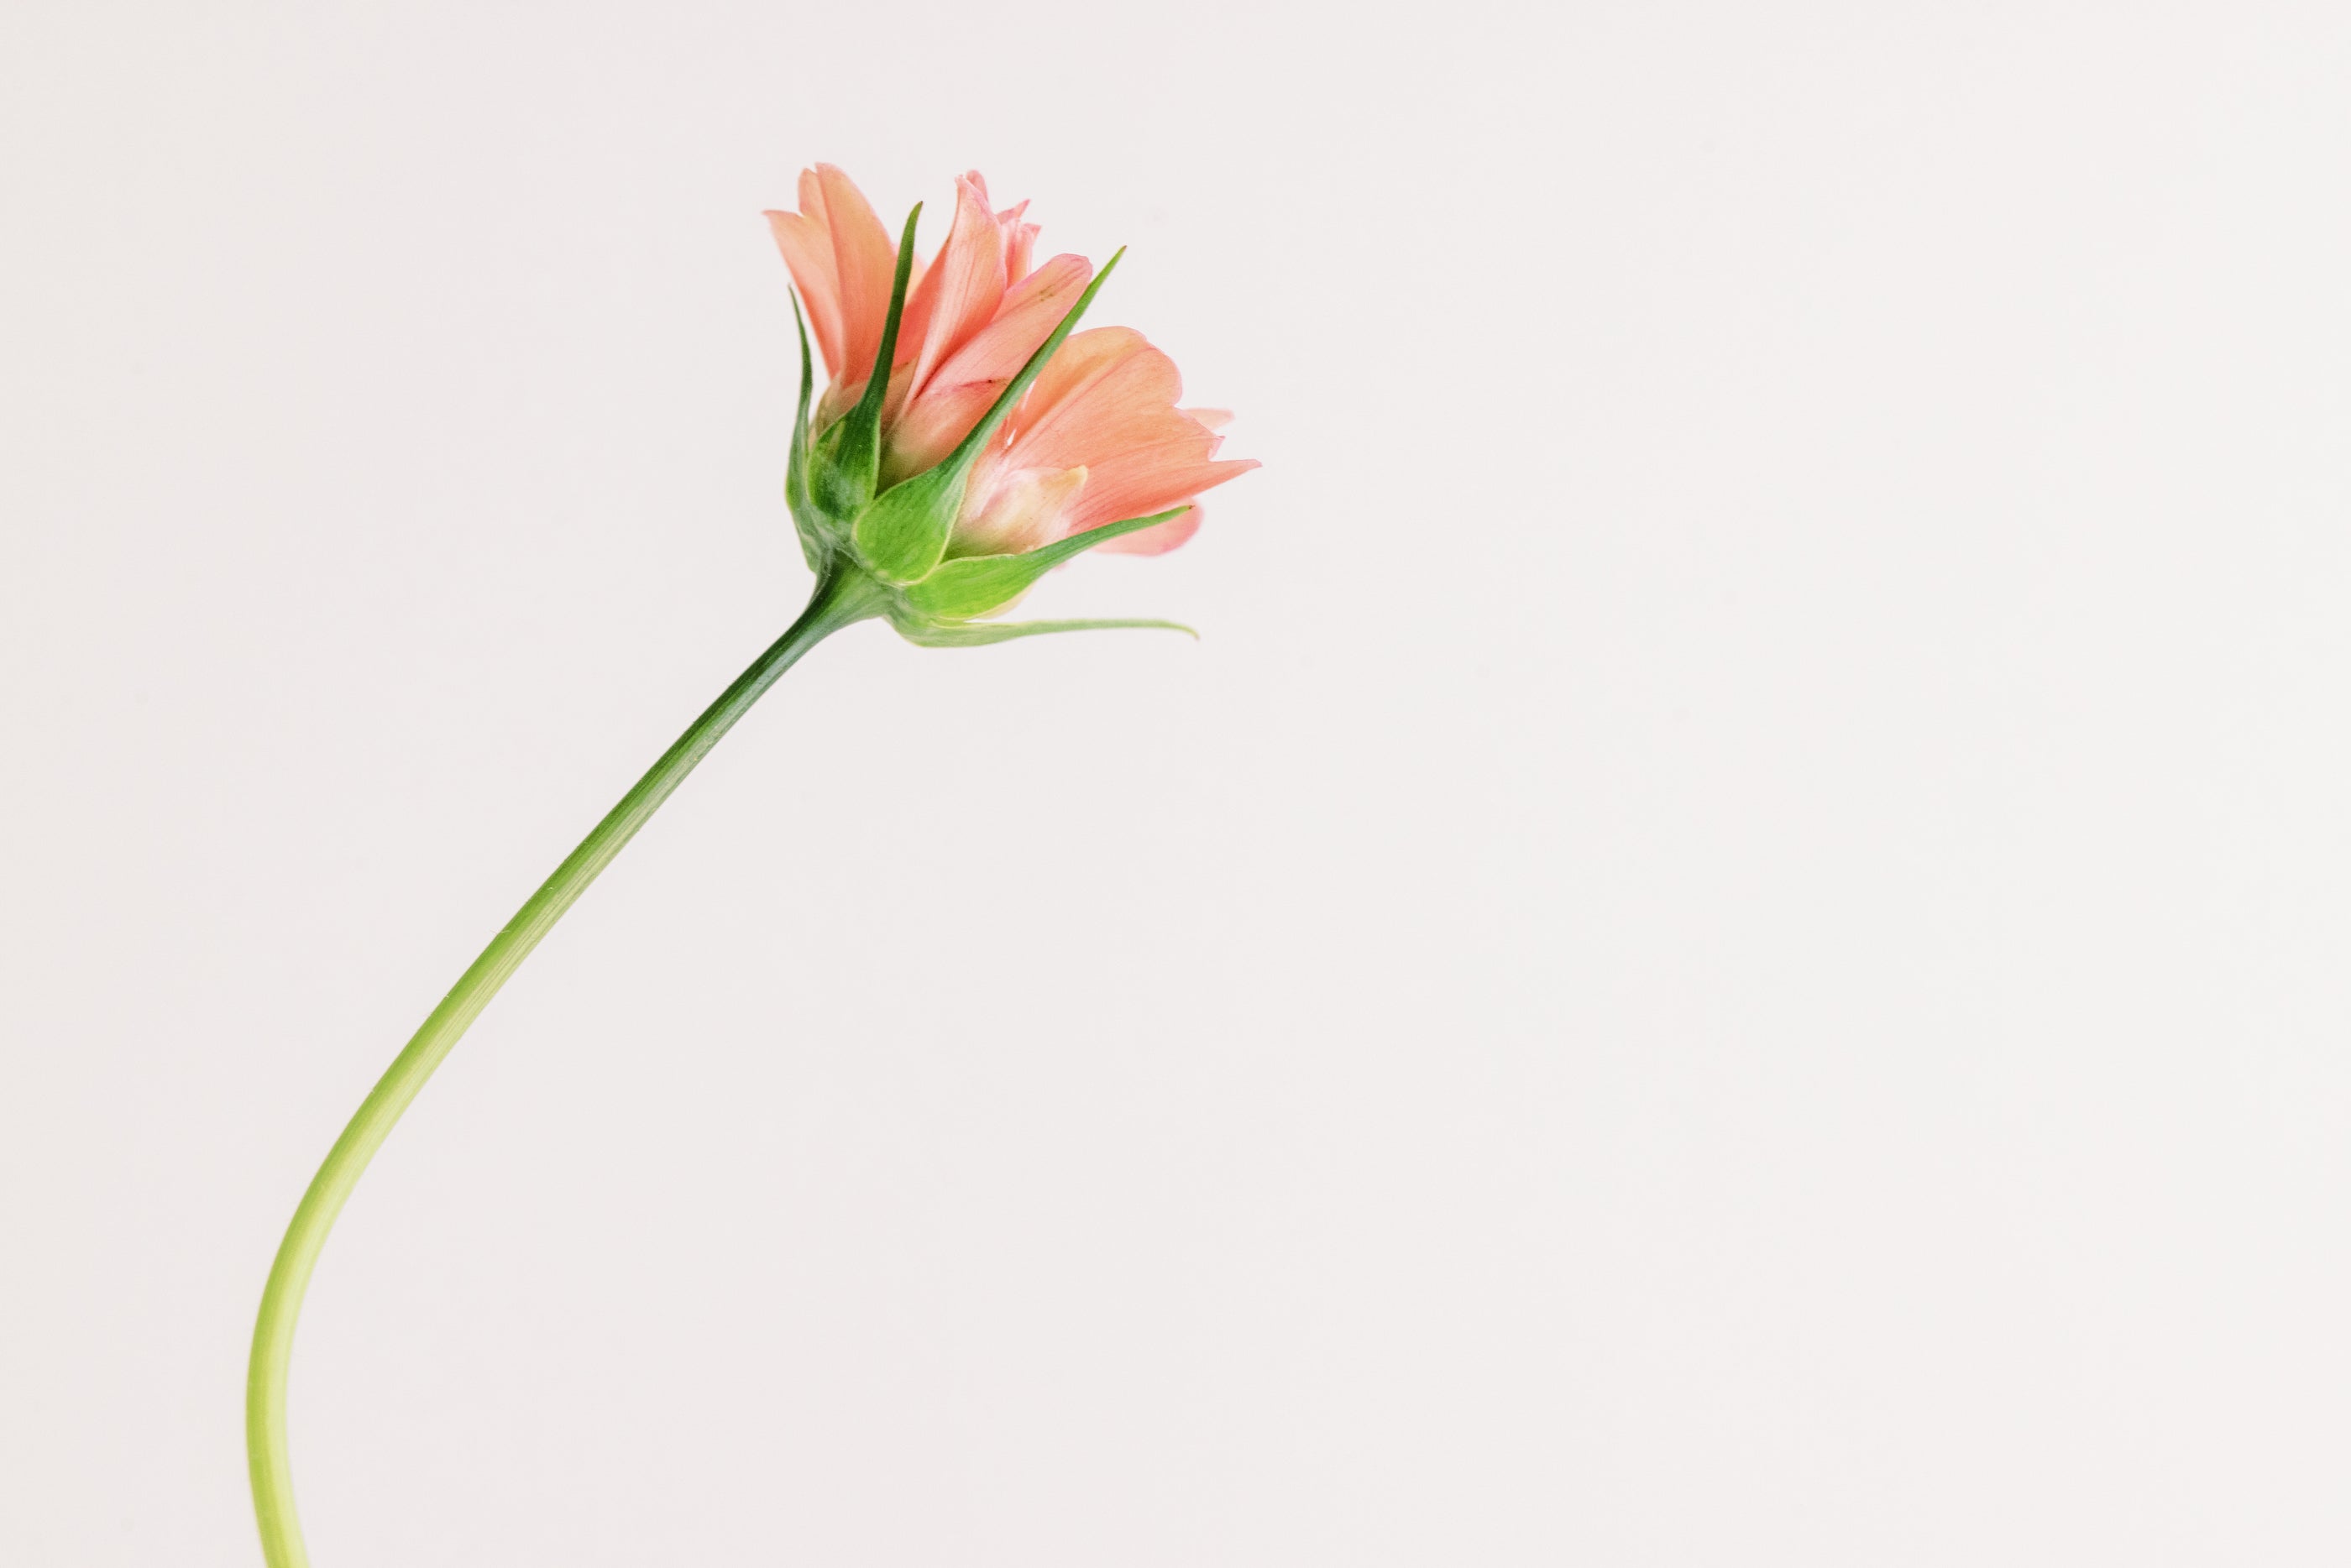 A single salmon pink flower with a long green stem, angled to the left against a plain white background